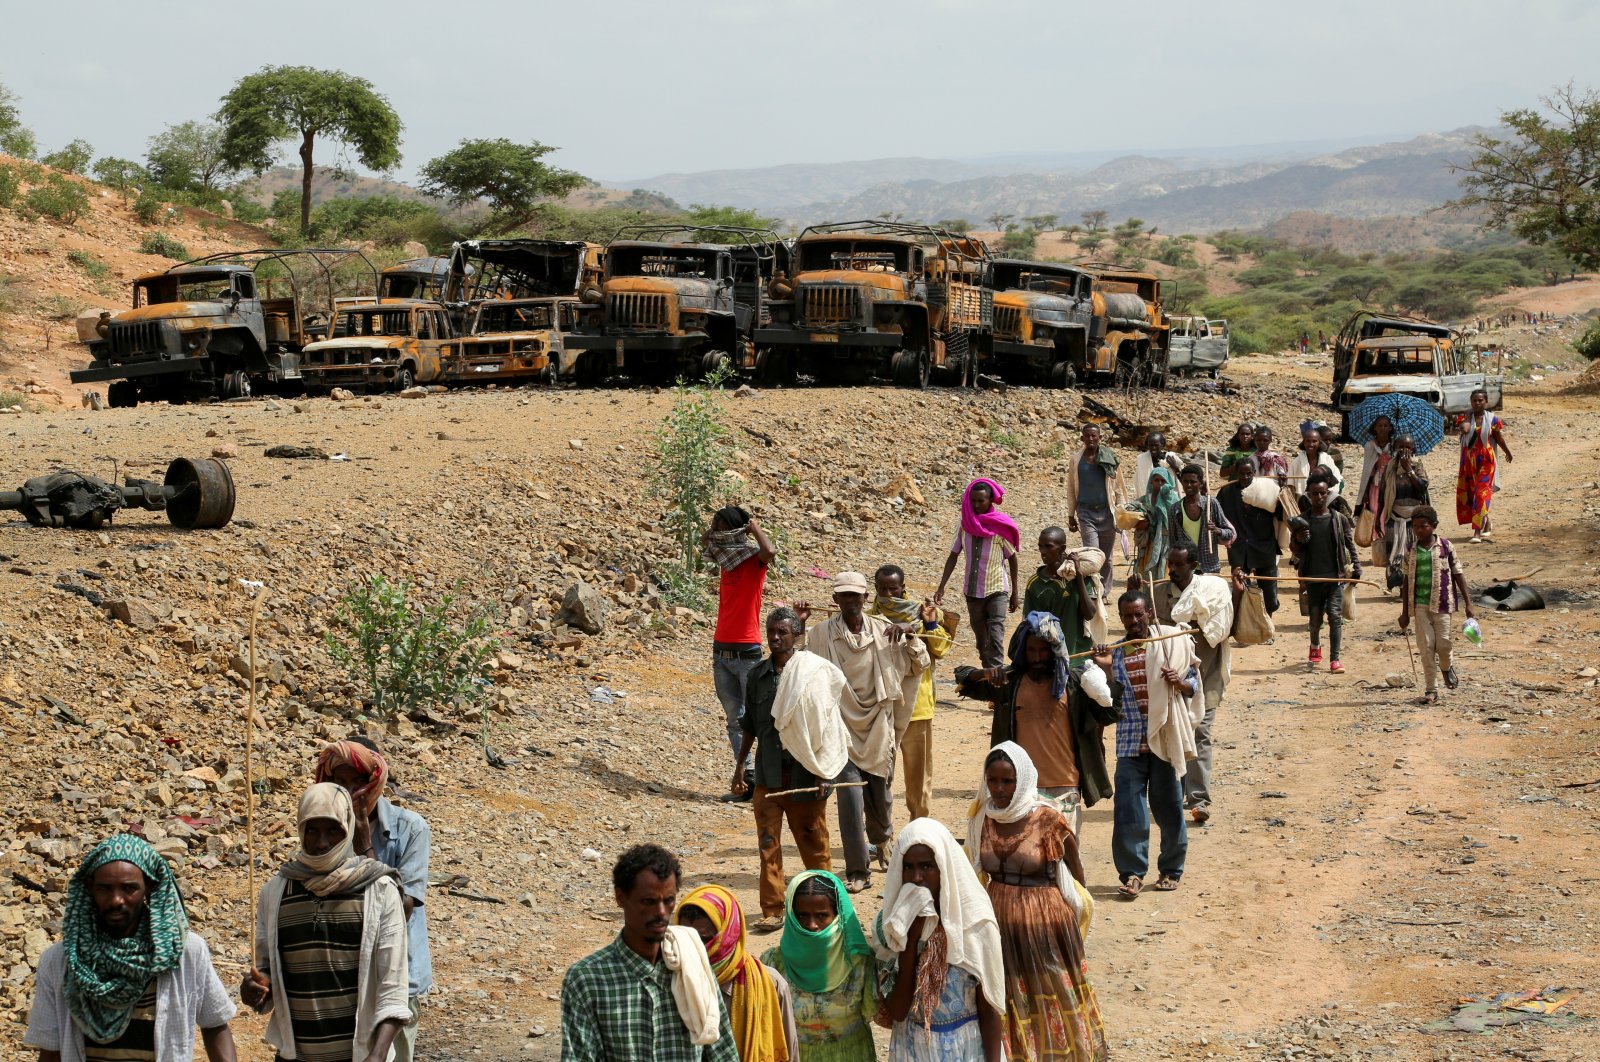 Villagers return from a market to Yechila town in south central Tigray walking past scores of burned vehicles, in Tigray, Ethiopia, July 10, 2021. (Reuters Photo)